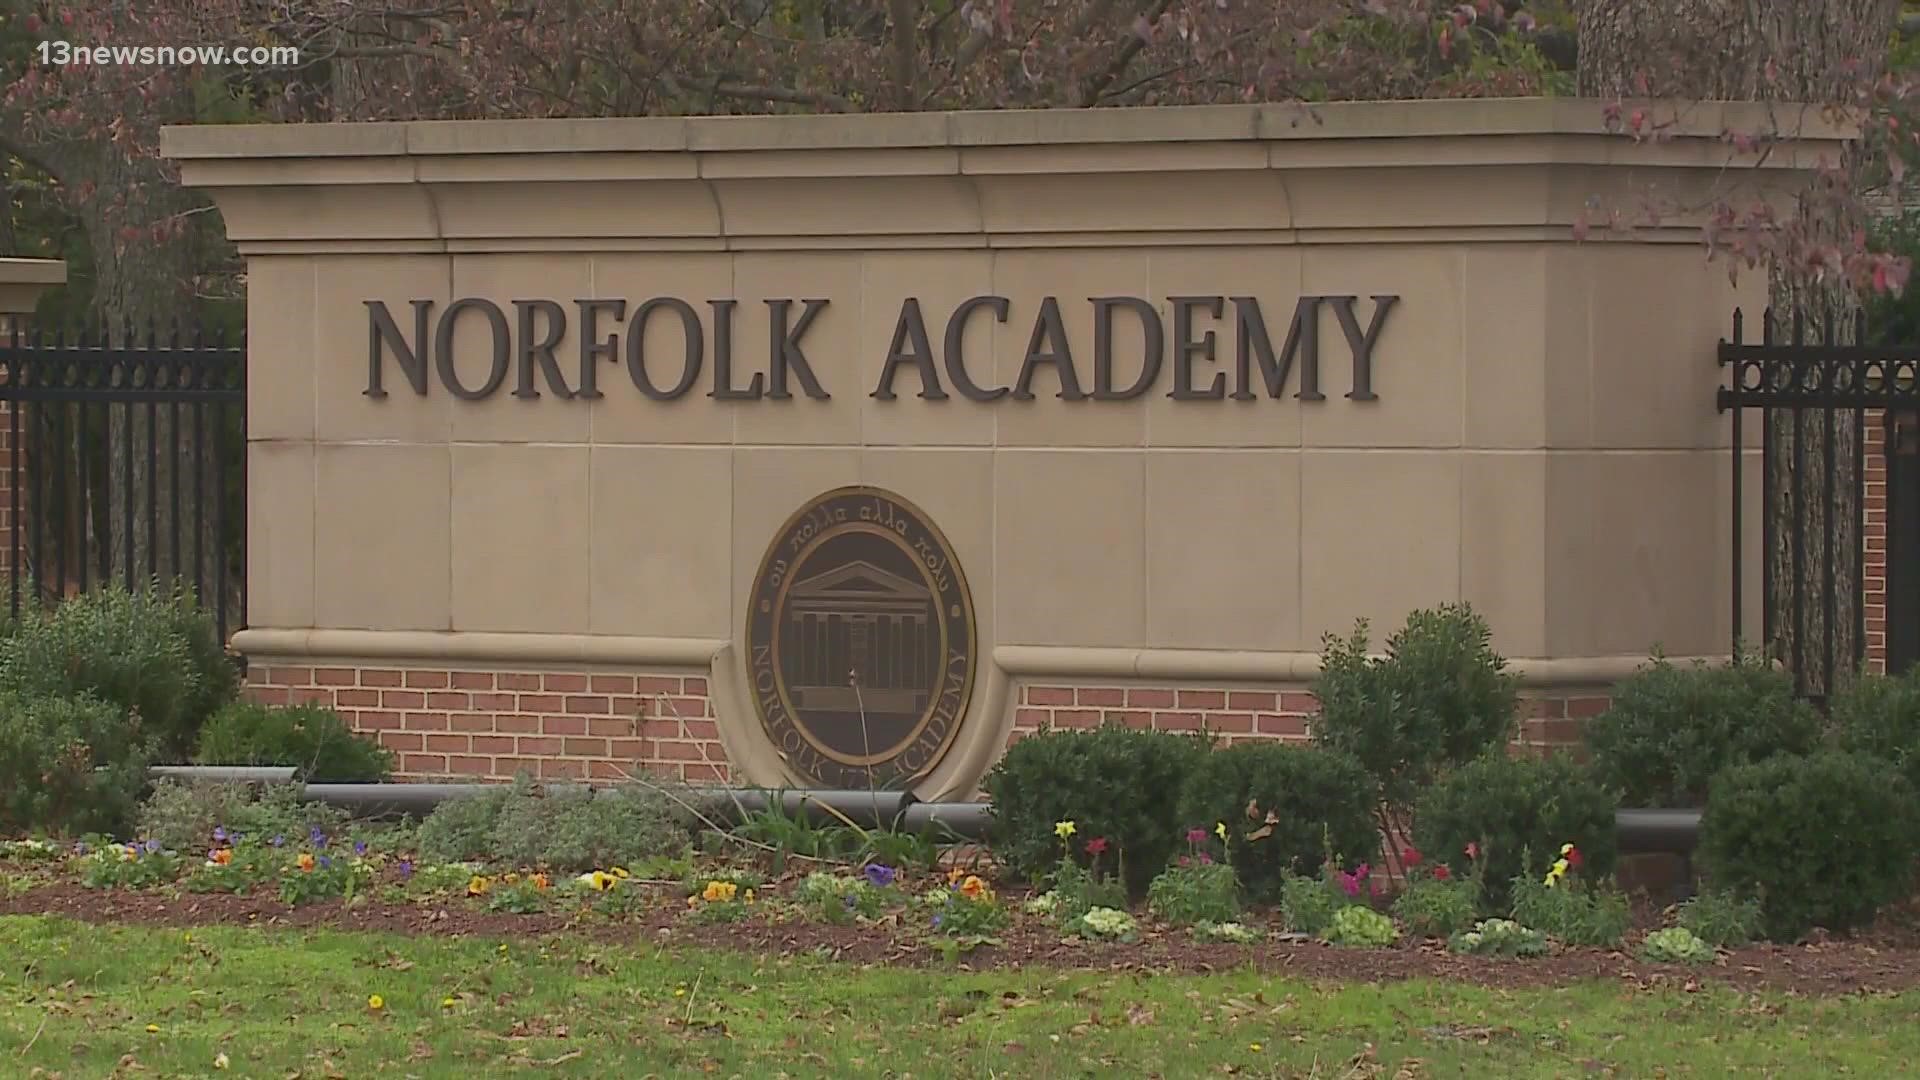 Jurors are now deliberating in federal court on whether Norfolk Academy discriminated against a former teacher.